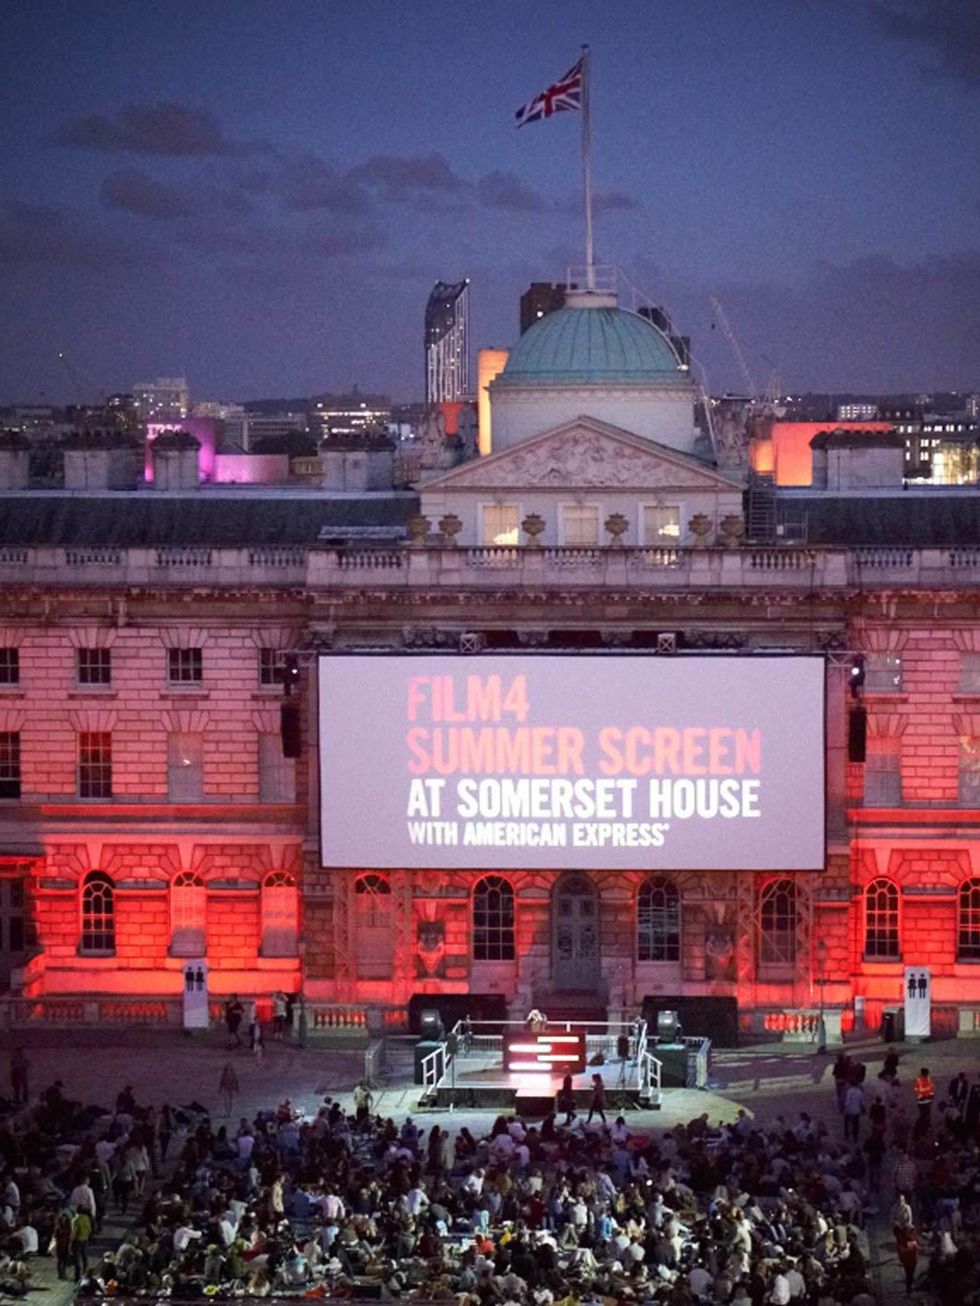 <p>Classics movies, picnics and surround sound make <a href="http://www.elleuk.com/star-style/news/film-four-at-somerset-house-london-outdoor-open-air-cinema-screening-premieres-about-time-and-prince-avalanche">Somerset Houses</a> outdoor cinema an unmis